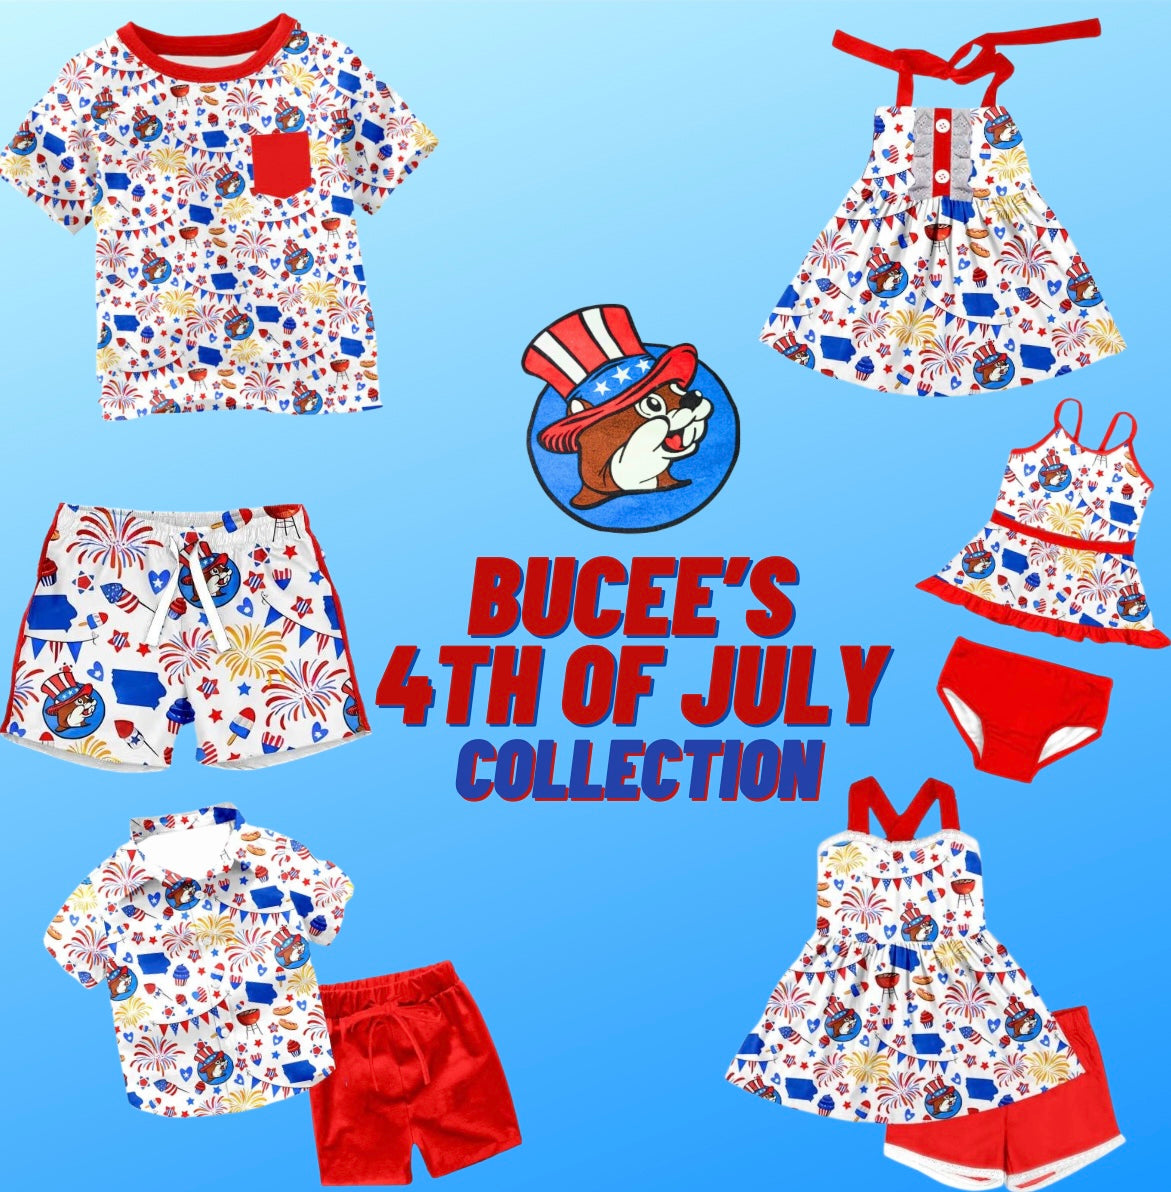 Bucee’s 4th of July Collection(CLOSED)